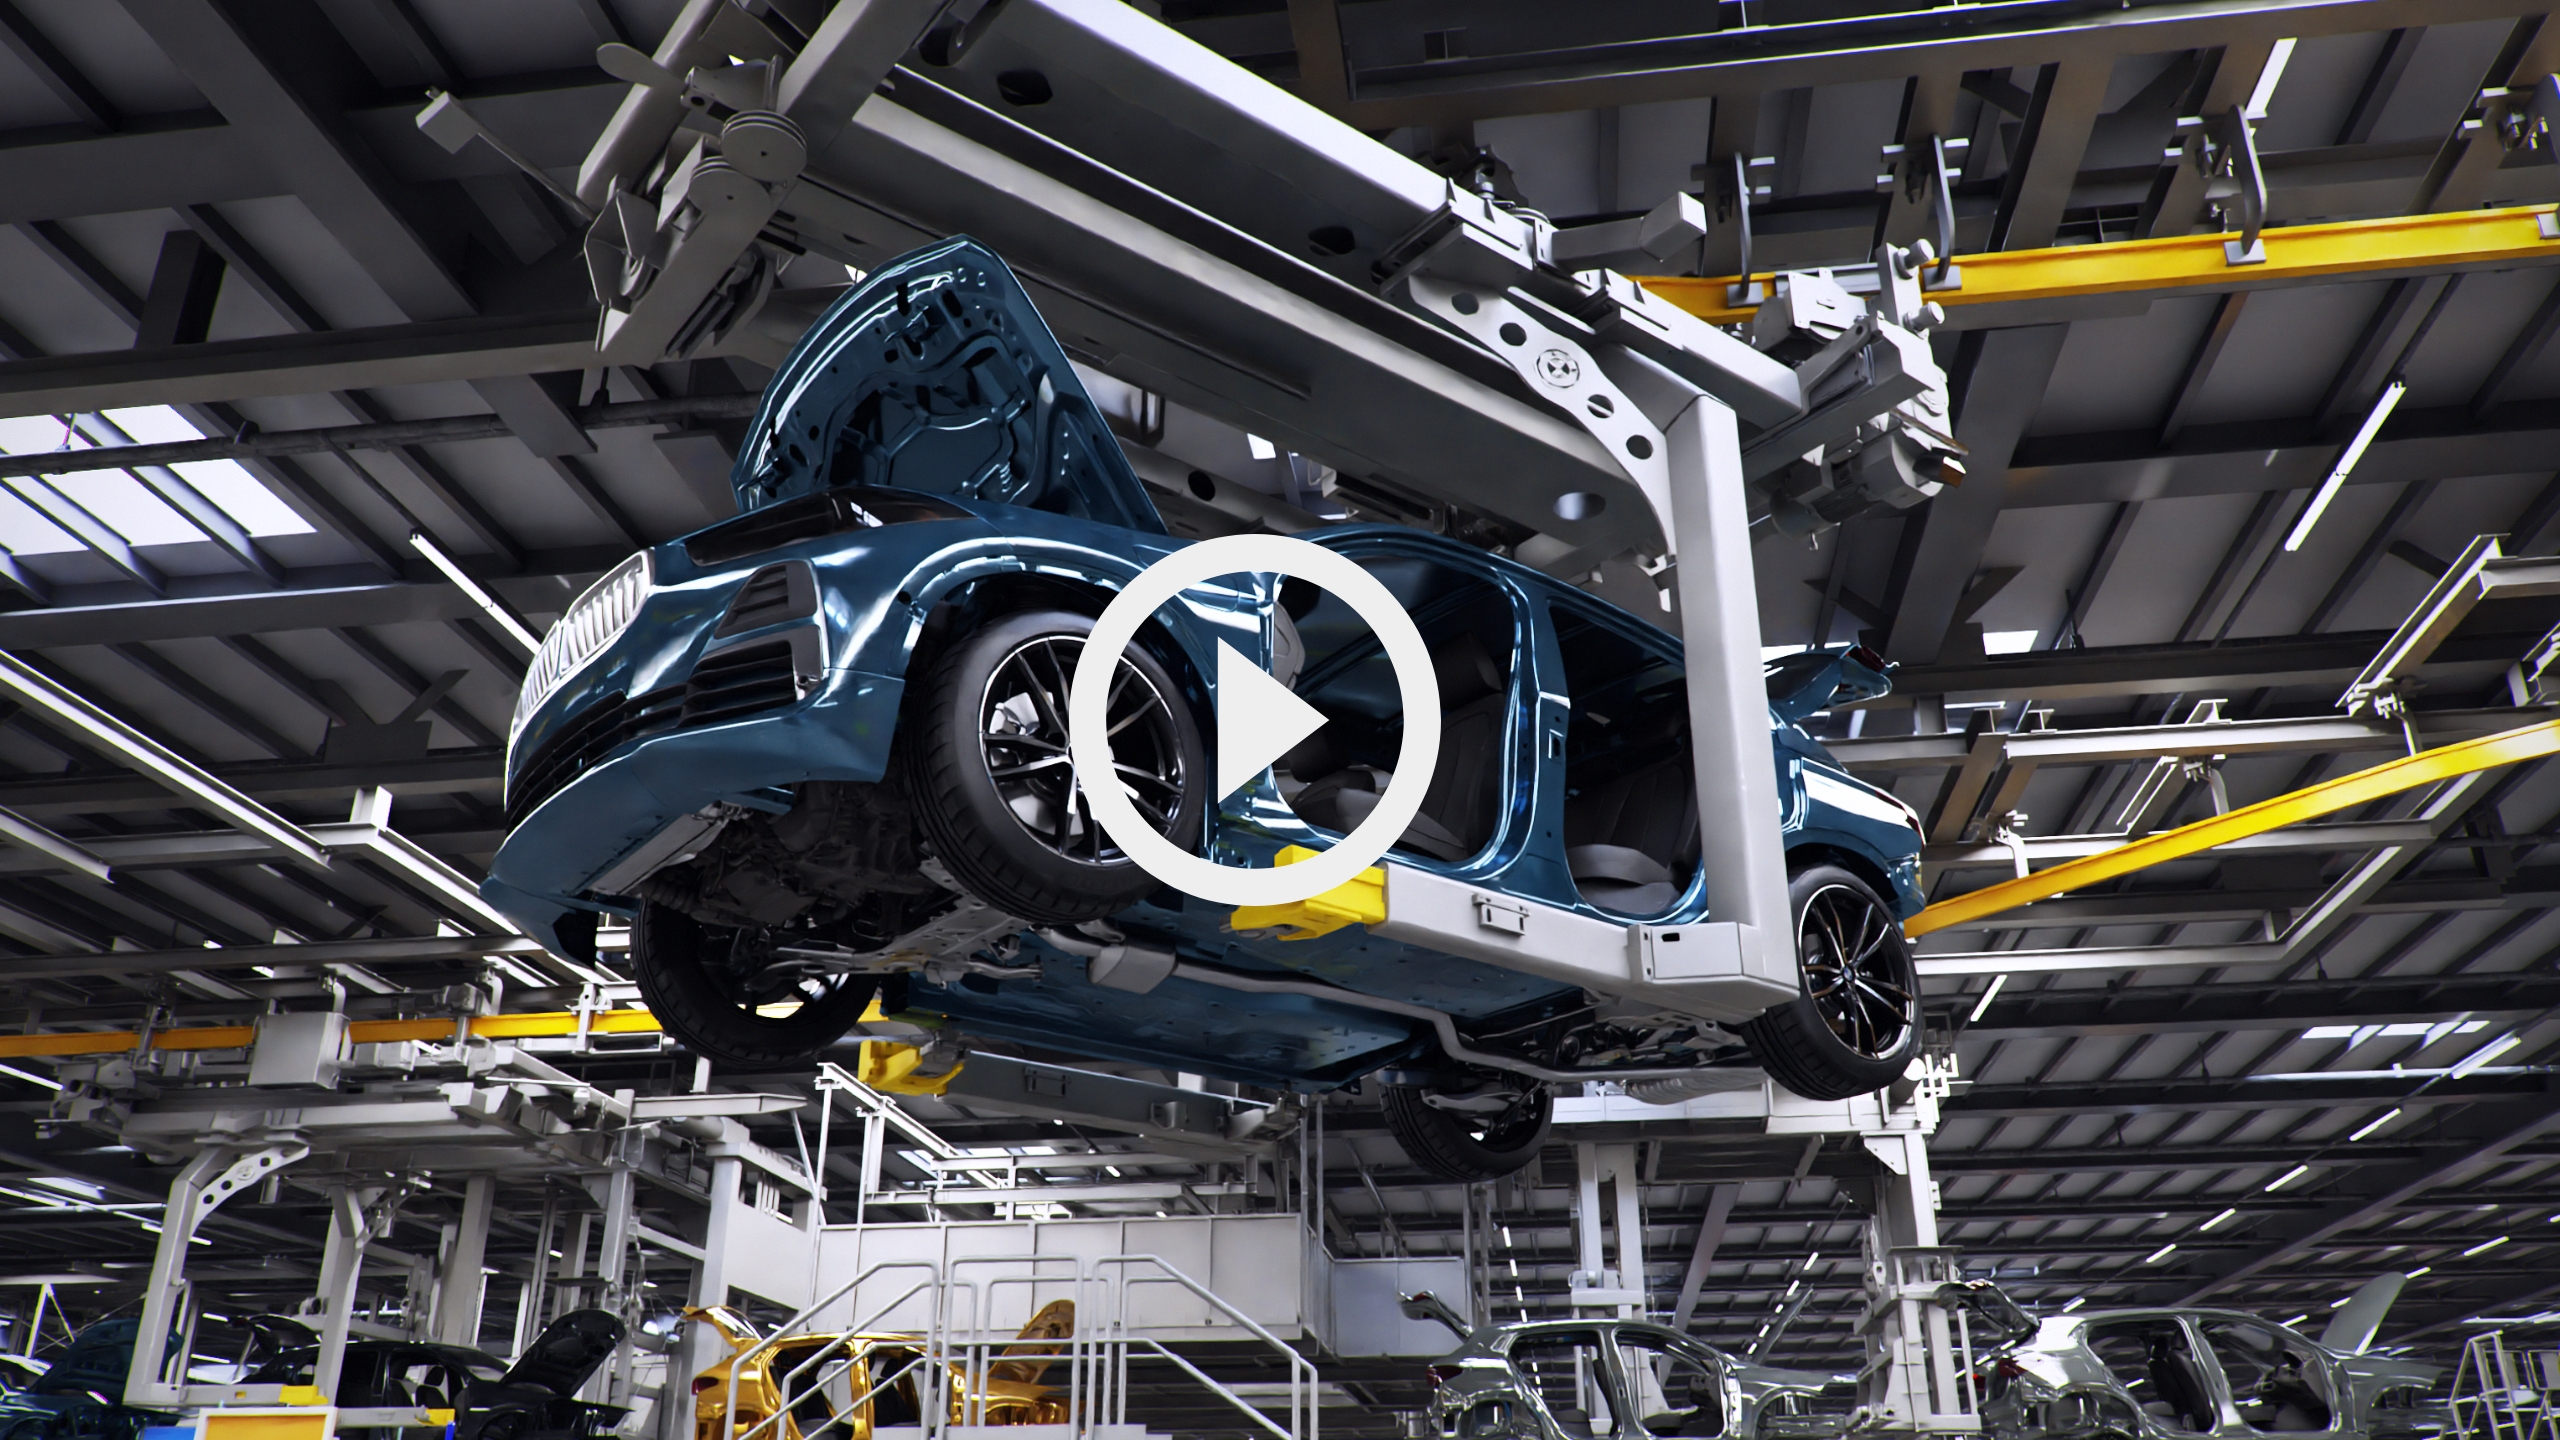 BMW Group Builds Their Factory of the Future 2.0 